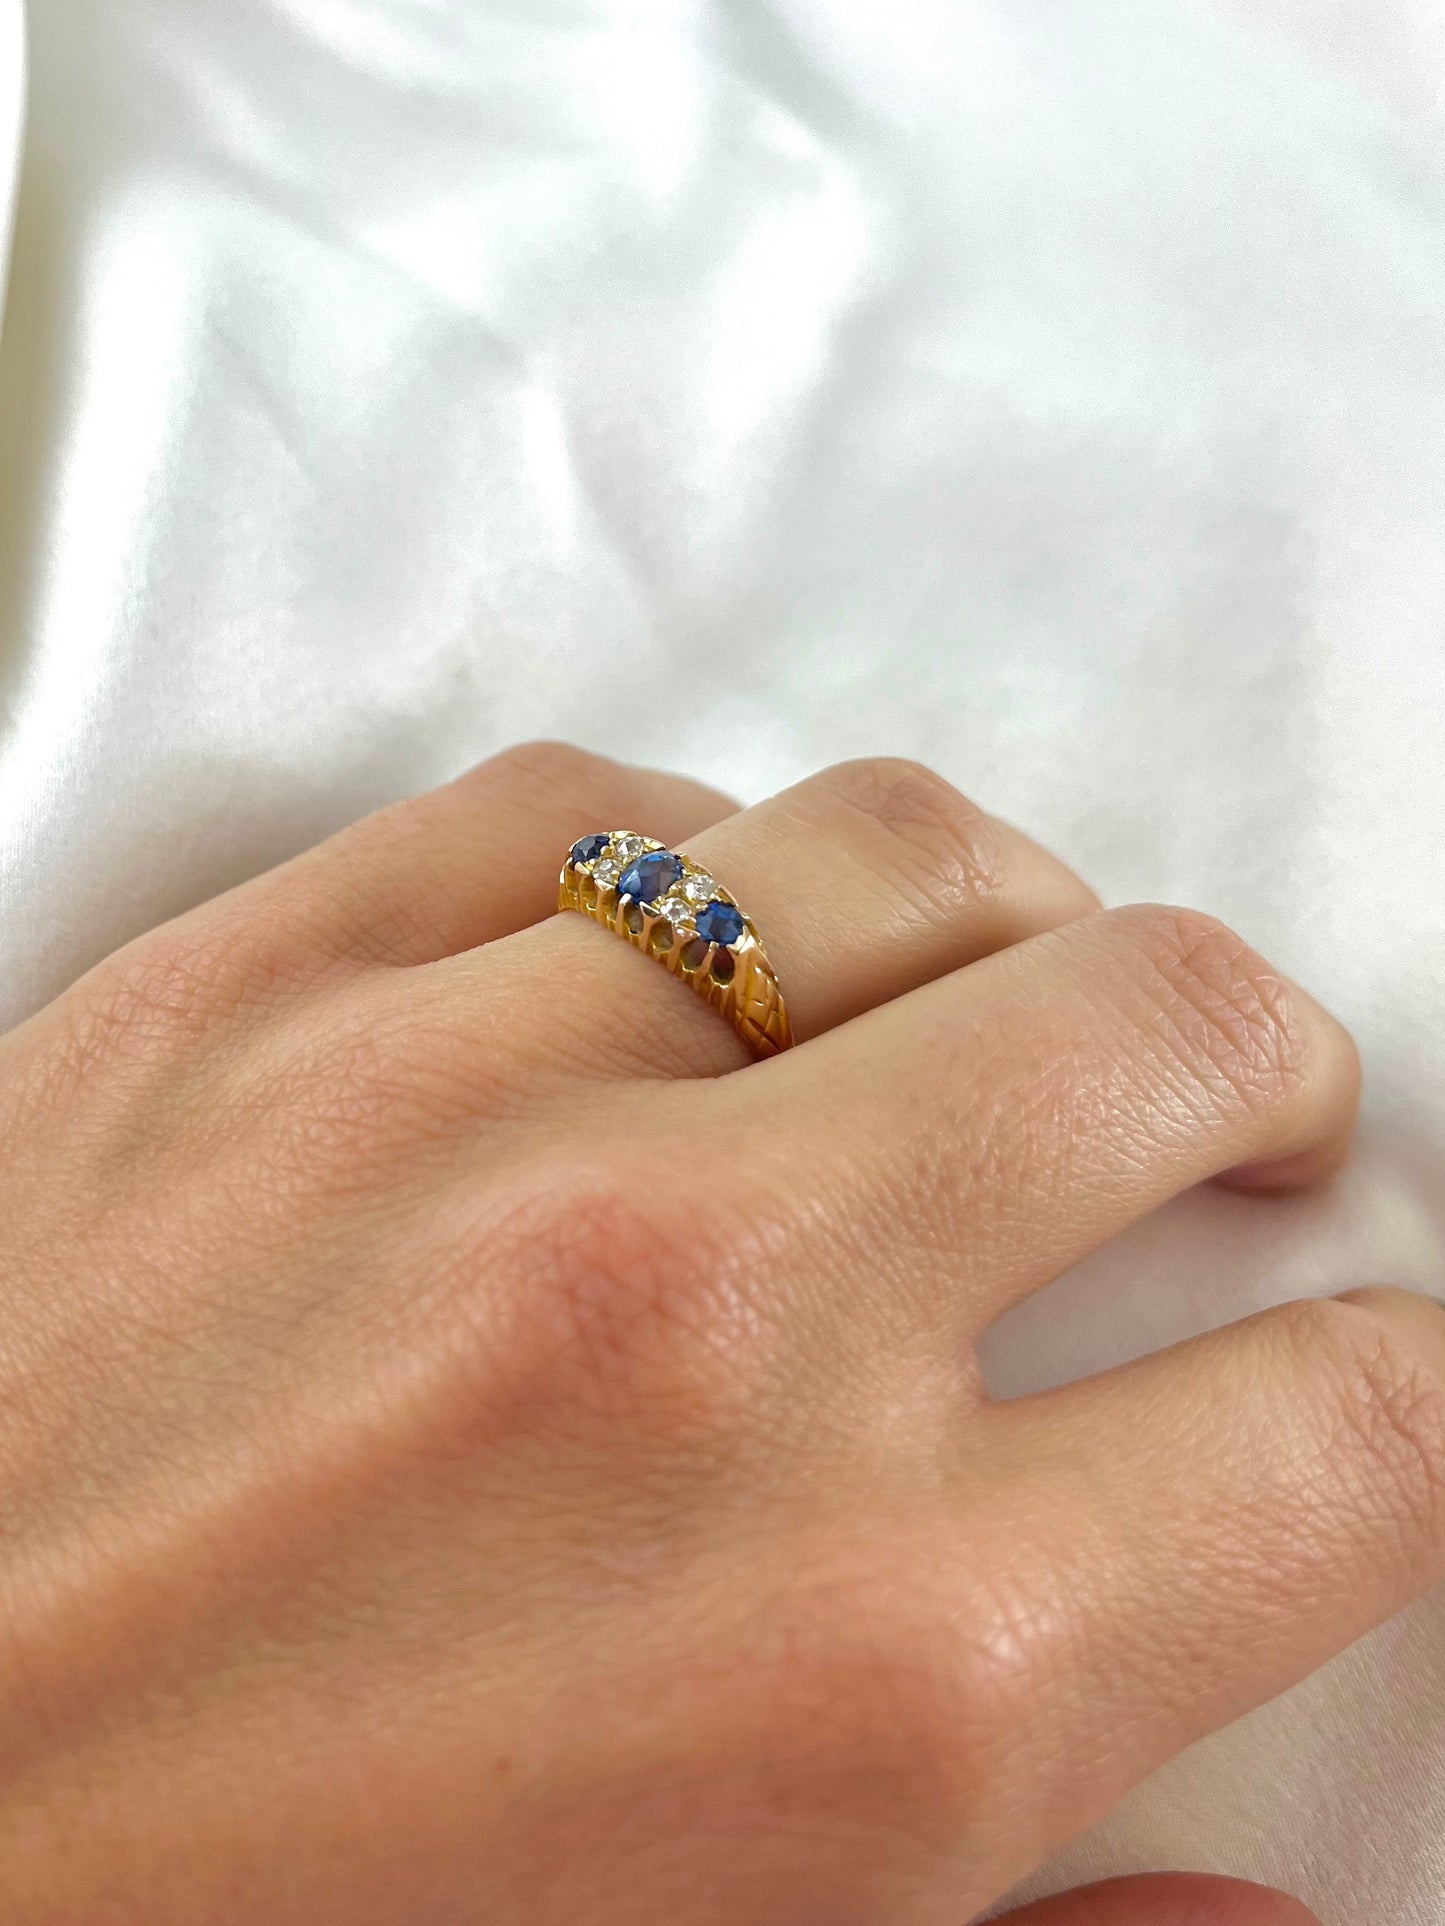 Antique Edwardian 18ct Gold Sapphire and Diamond Engagement Ring, Size O + 0.5 1903